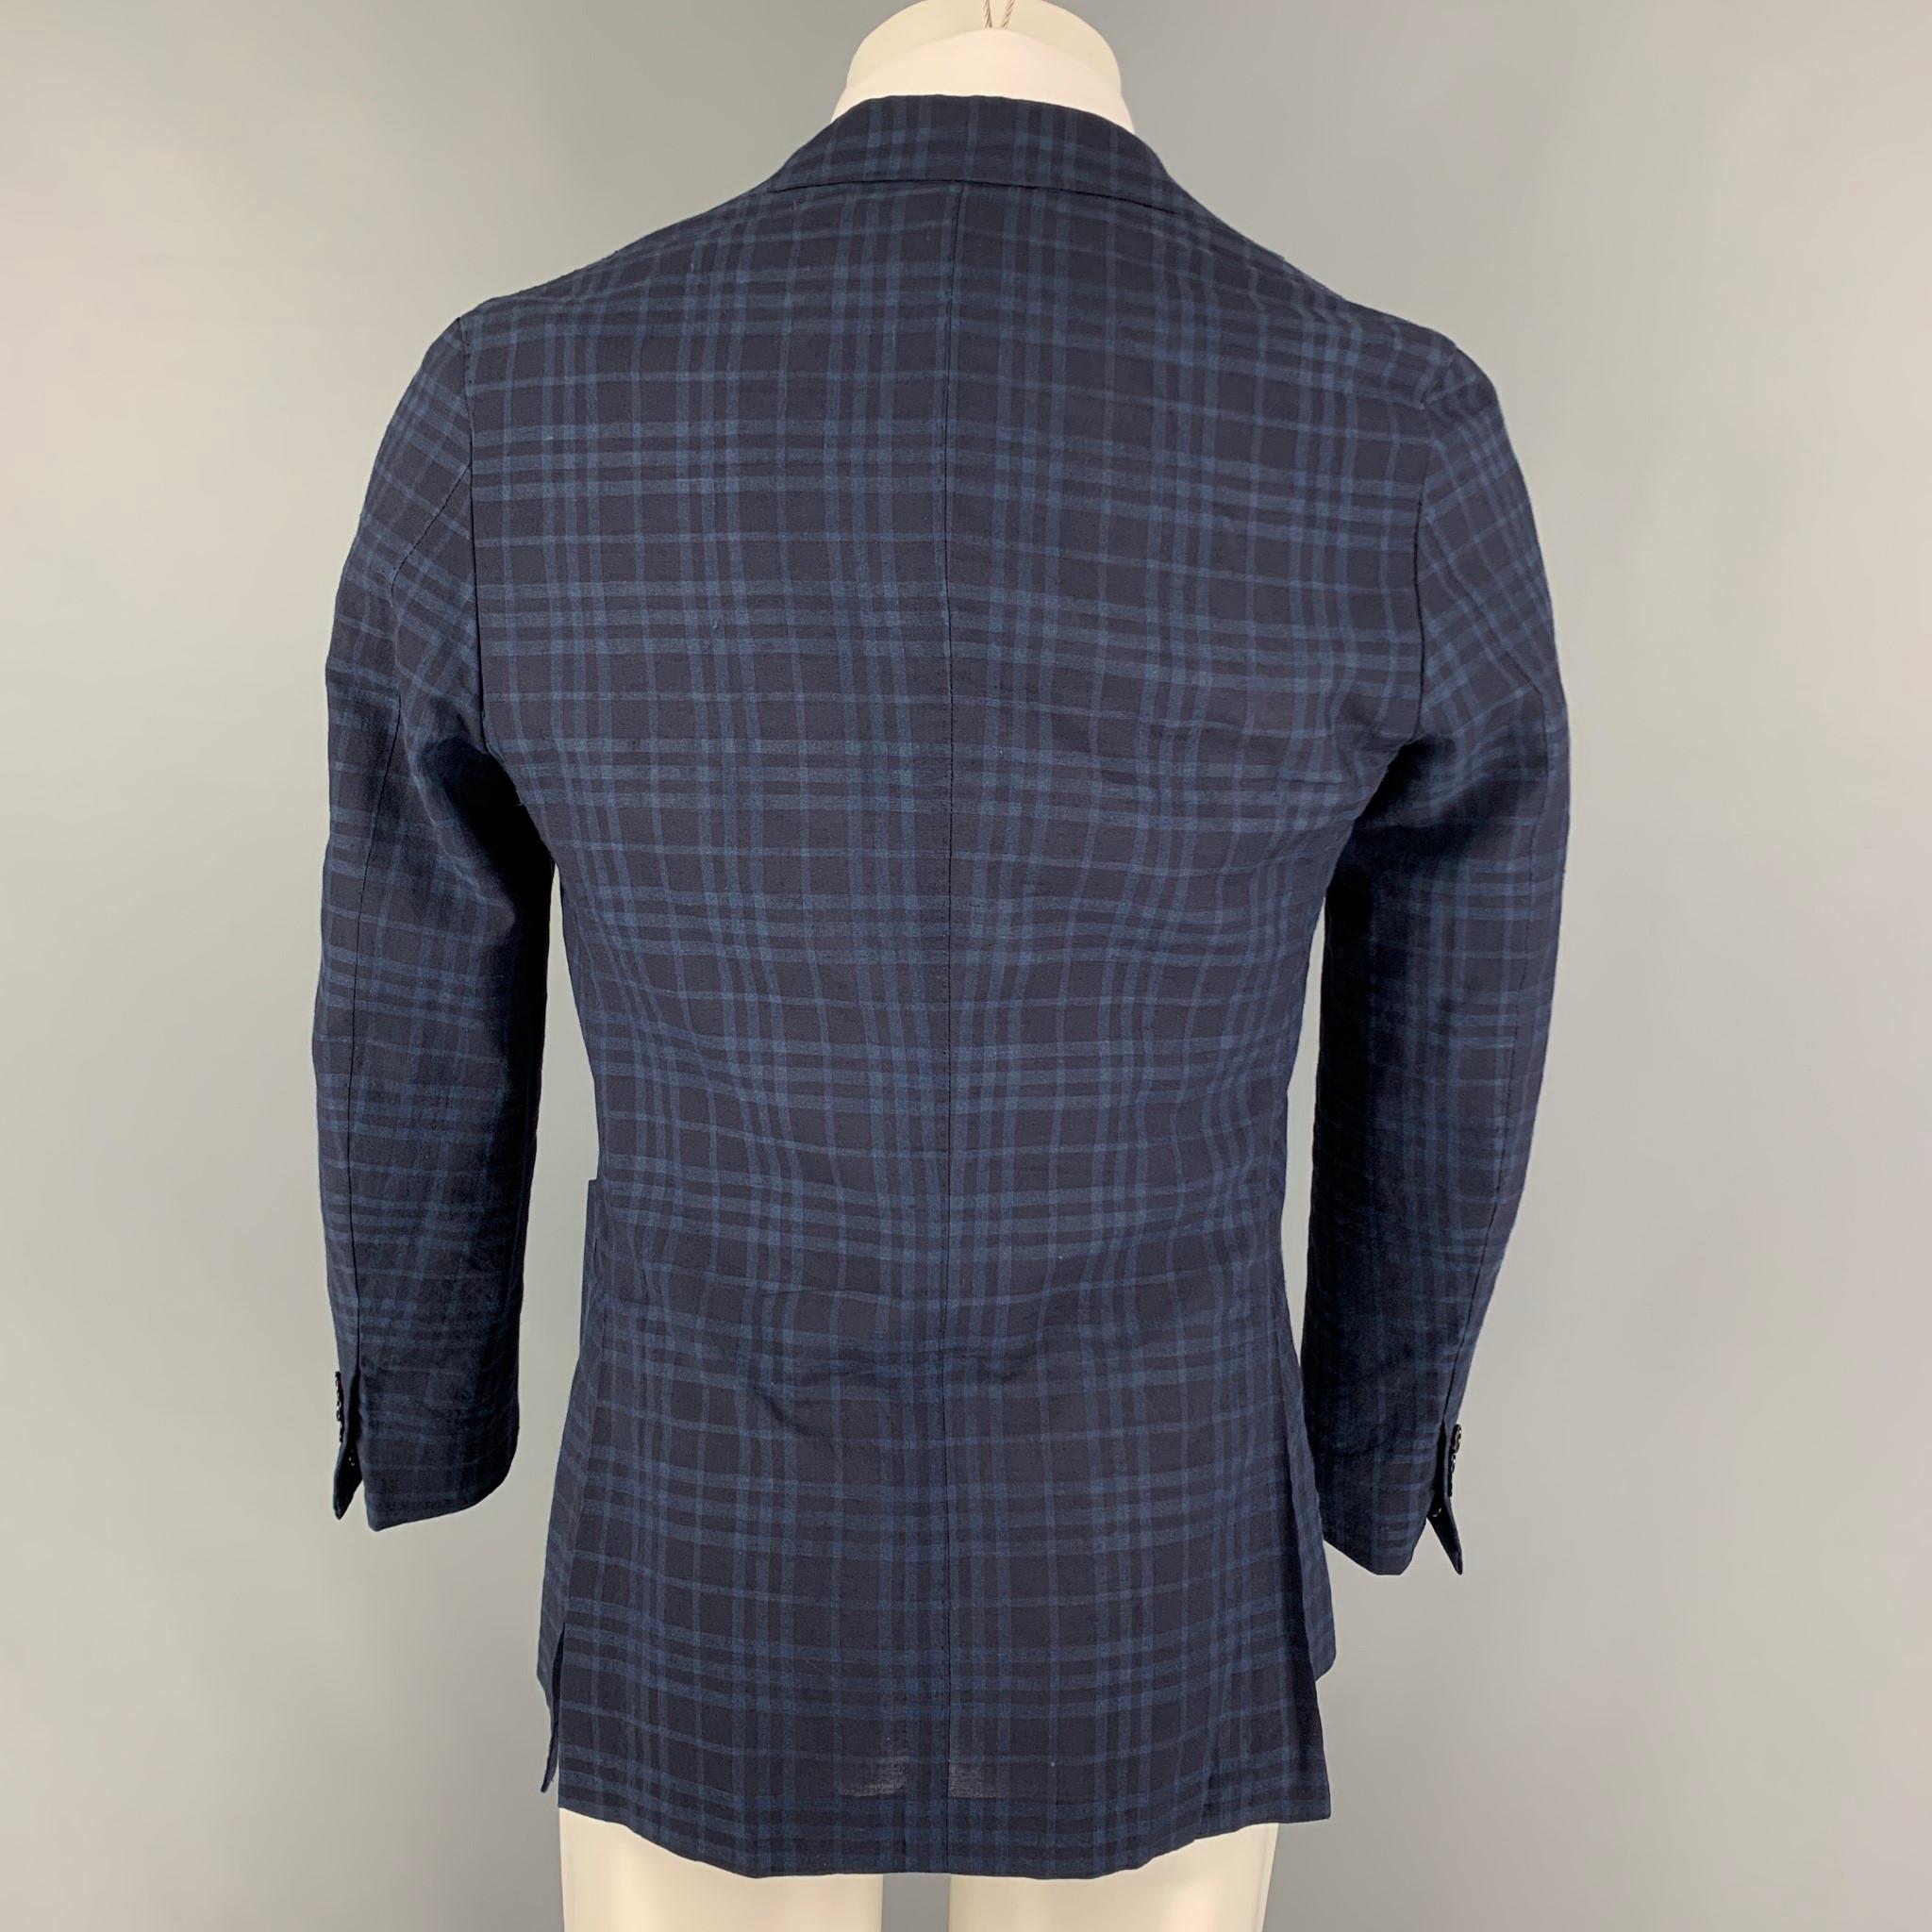 Black FUGATO for SHIPS Size 36 Navy Blue Plaid Flax Wool Sport Coat